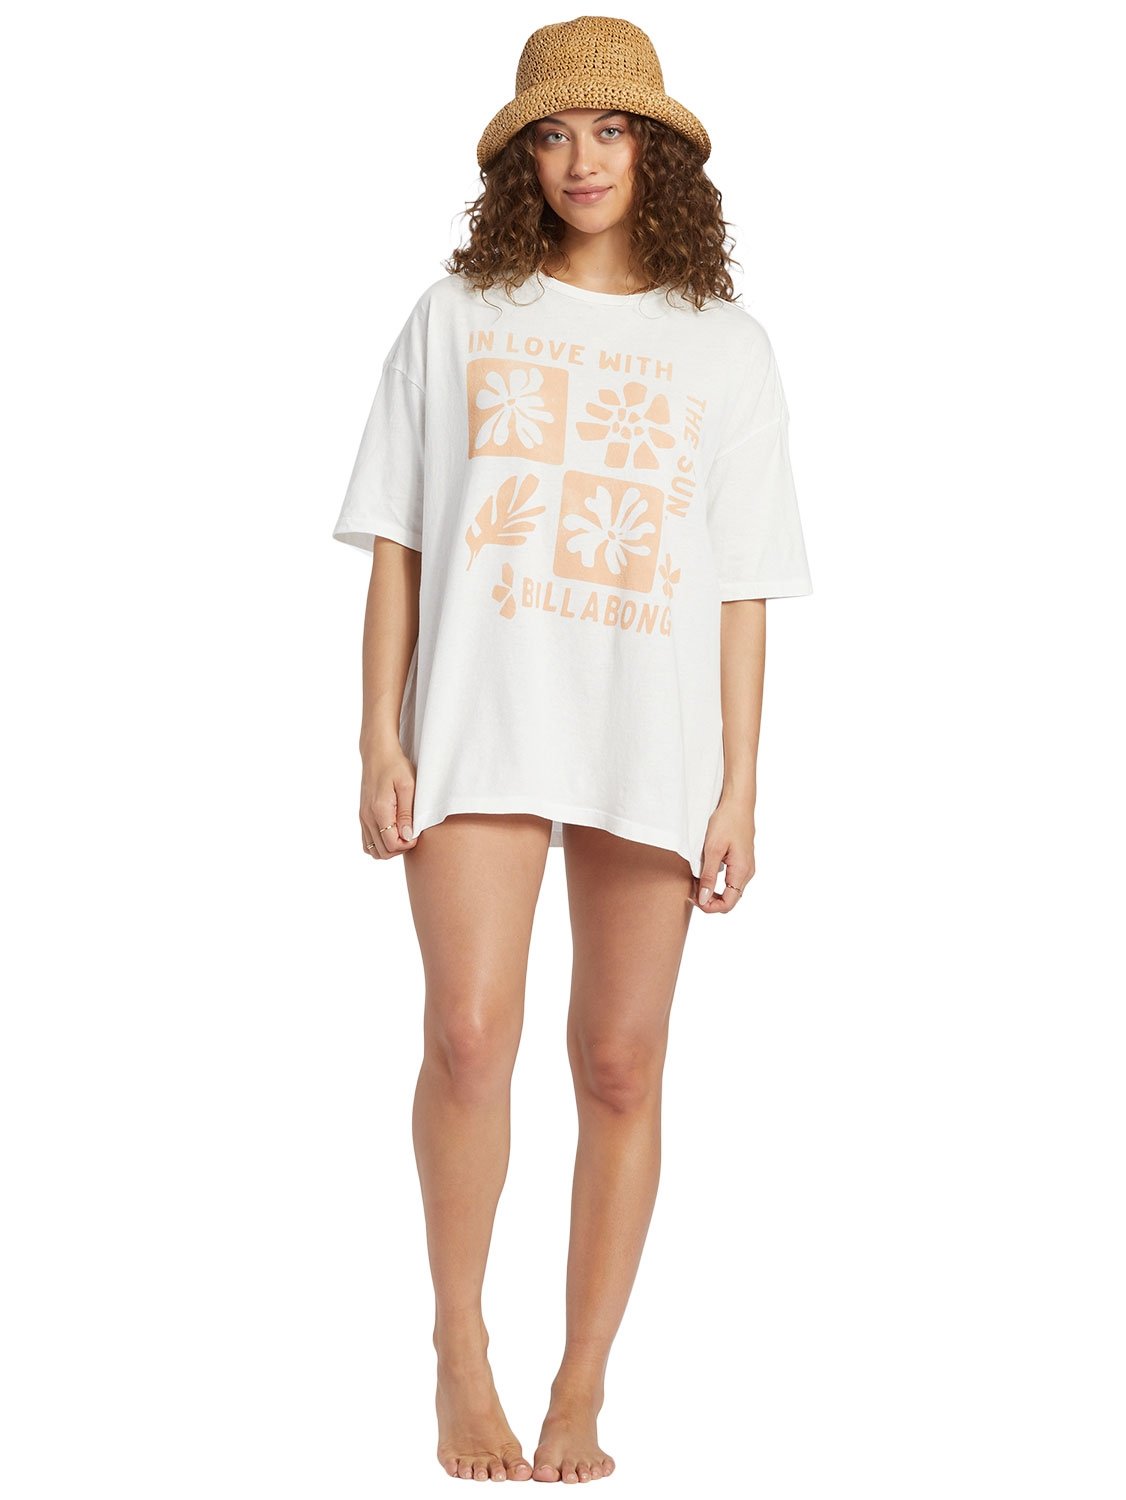 Billabong Ladies In Love With The Sun T-Shirt